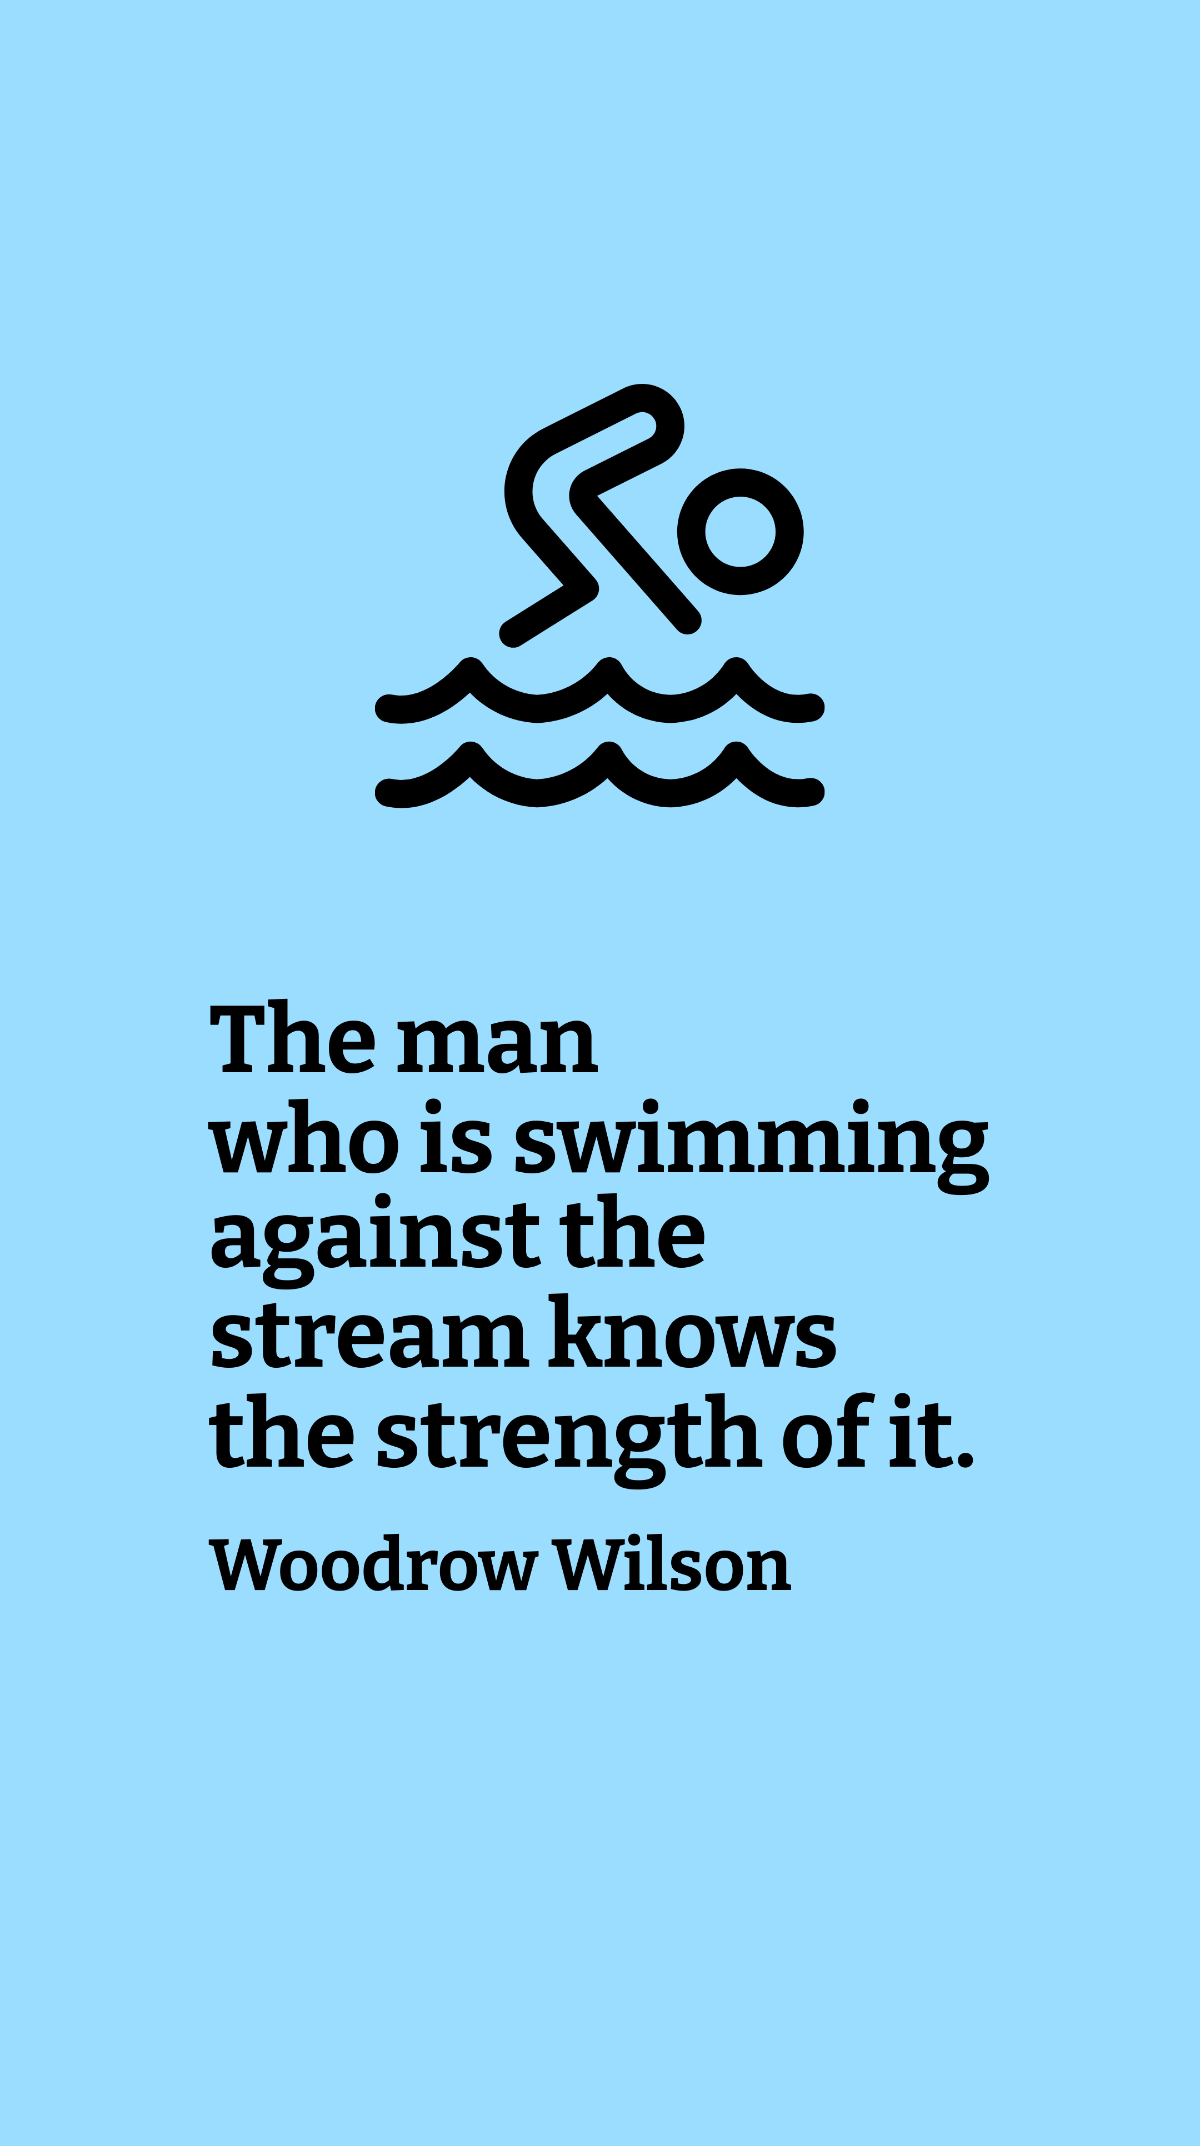 Woodrow Wilson - The man who is swimming against the stream knows the strength of it. Template